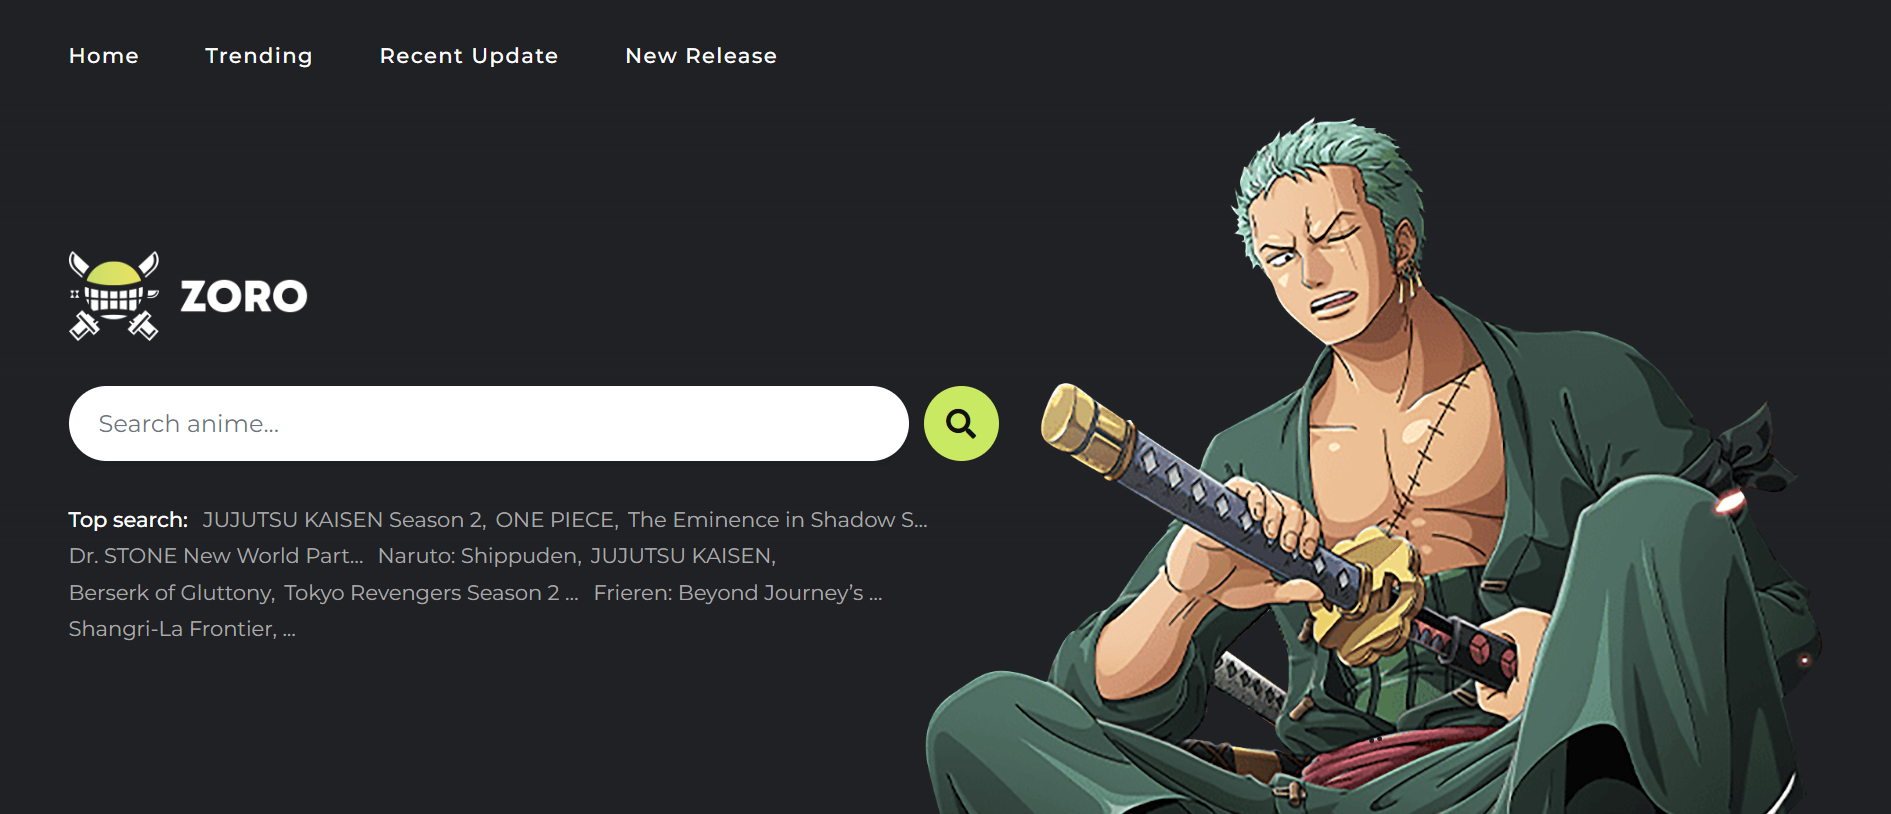 Zoro.to Home Page